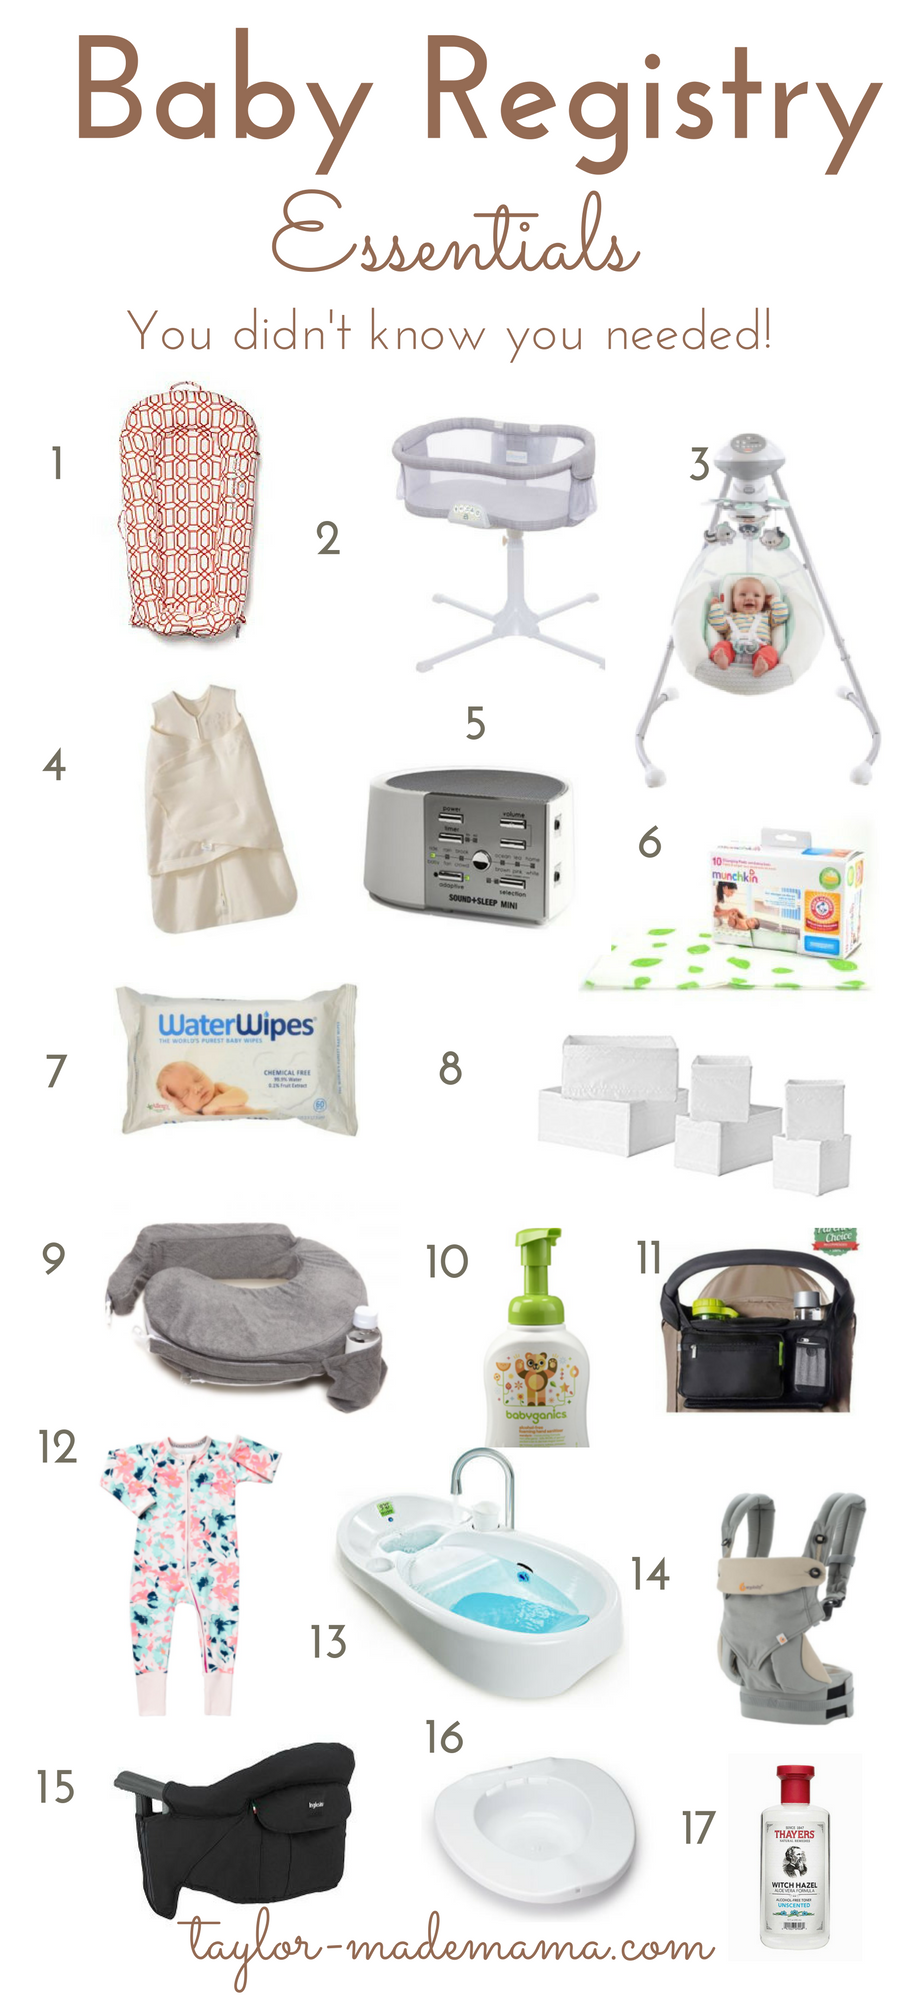 Everything You Need to Buy for Your Newborn Baby